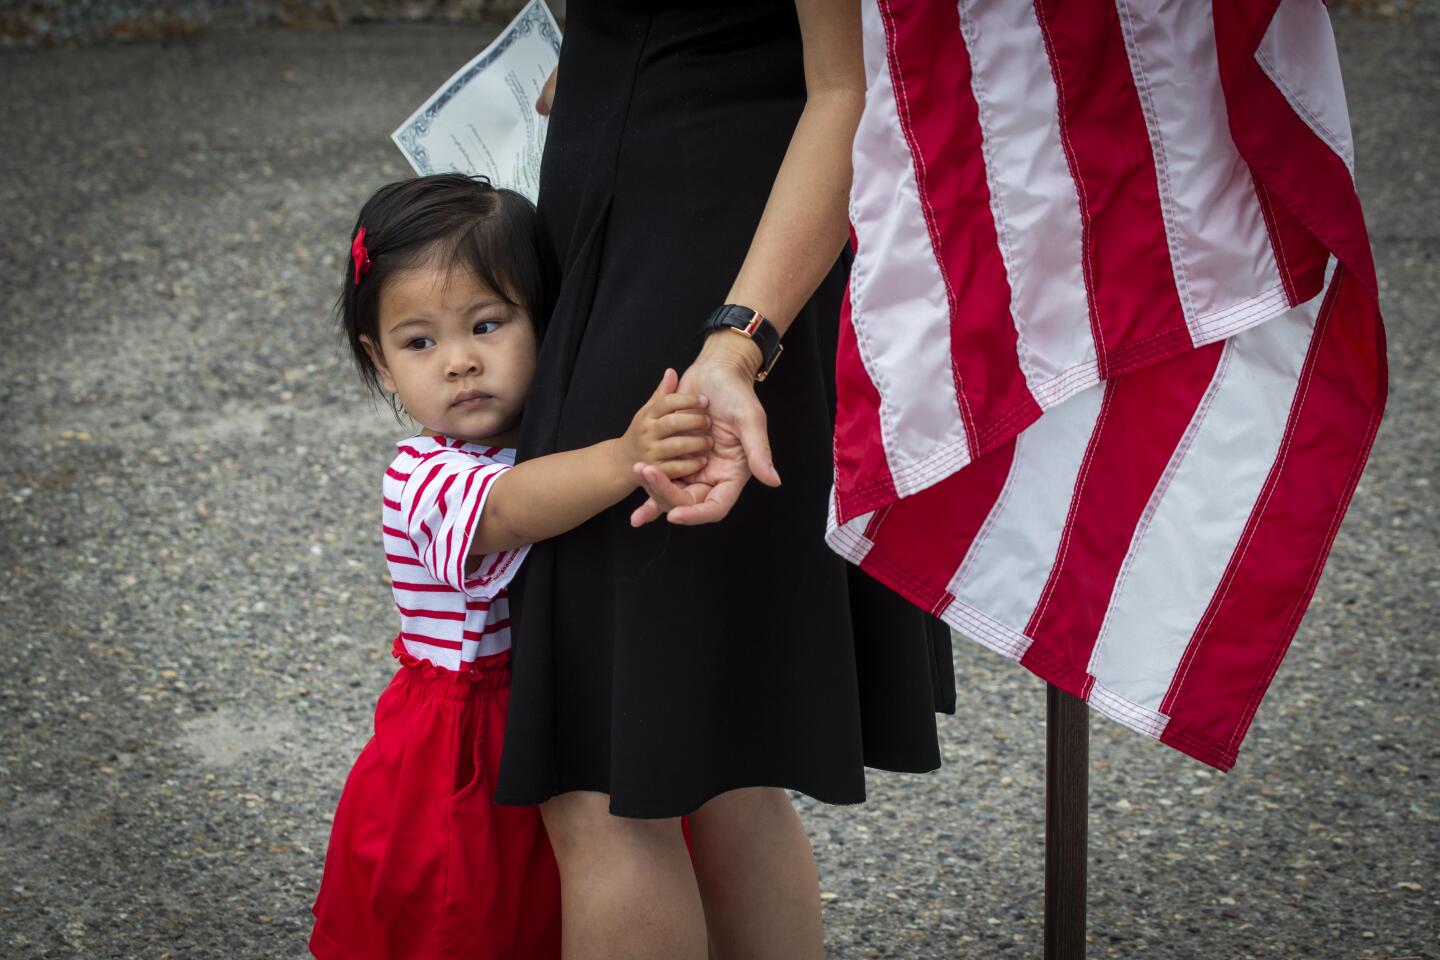 LAGUNA NIGUEL, CA - JUNE 23: Talia Han, 1, hugs her mom, Thao Pham, who's a pop singer with a stage name of Thanh Thao, after taking the oath of allegiance at a drive through citizenship naturalization at the Chet Holifield Federal Building parking lot Tuesday, June 23, 2020 in Laguna Niguel. Pham immigrated to Westminster from Vietnam. About 210-270 people a day have appointments throughout the day for 11 days in seven locations across Southern California. Due to the COVID-19 pandemic, the courts have delegated the authority to U.S. Citizenship and Immigration Services to administer the Oath of Allegiance at the naturalization ceremony. Taking the oath completes the process of becoming a U.S. citizen. (Allen J. Schaben / Los Angeles Times)